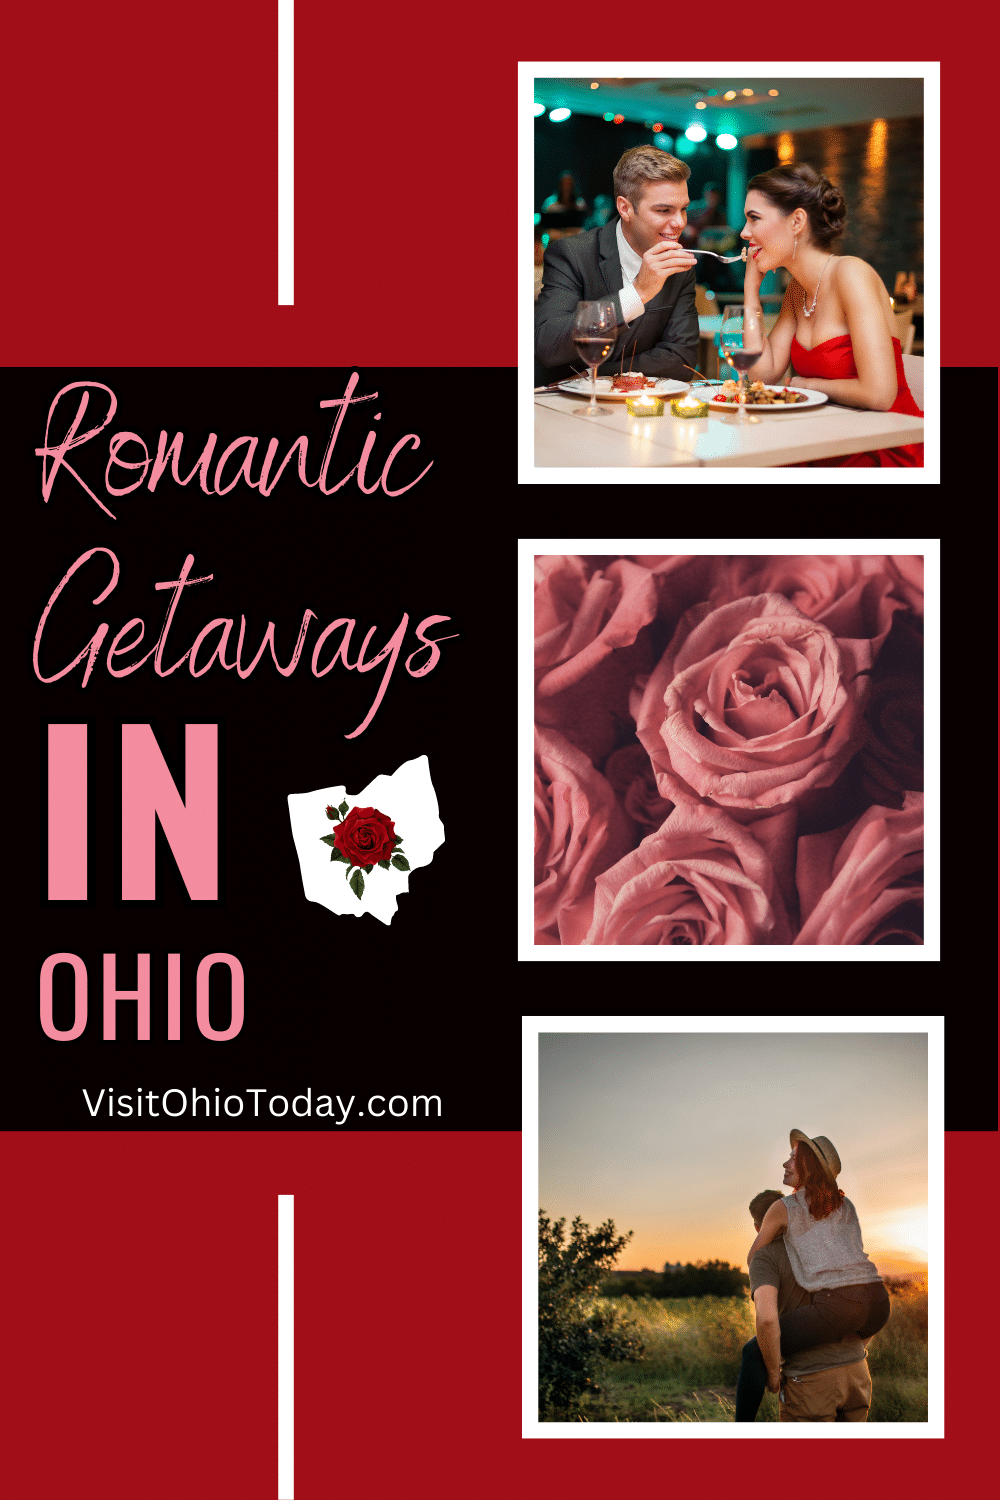 From a little rock and roll to flying the blue skies to playing in the trees, Ohio offers amazing locations to spend on a couple’s getaway. You can enjoy time in the big city or maybe take a drive in the rural area. Your dream couple’s getaway is really up to your imagination. As you consider your options, here are a few suggestions | Romantic Getaways In Ohio | Things To Do For Couples In Ohio | Visit Ohio Today